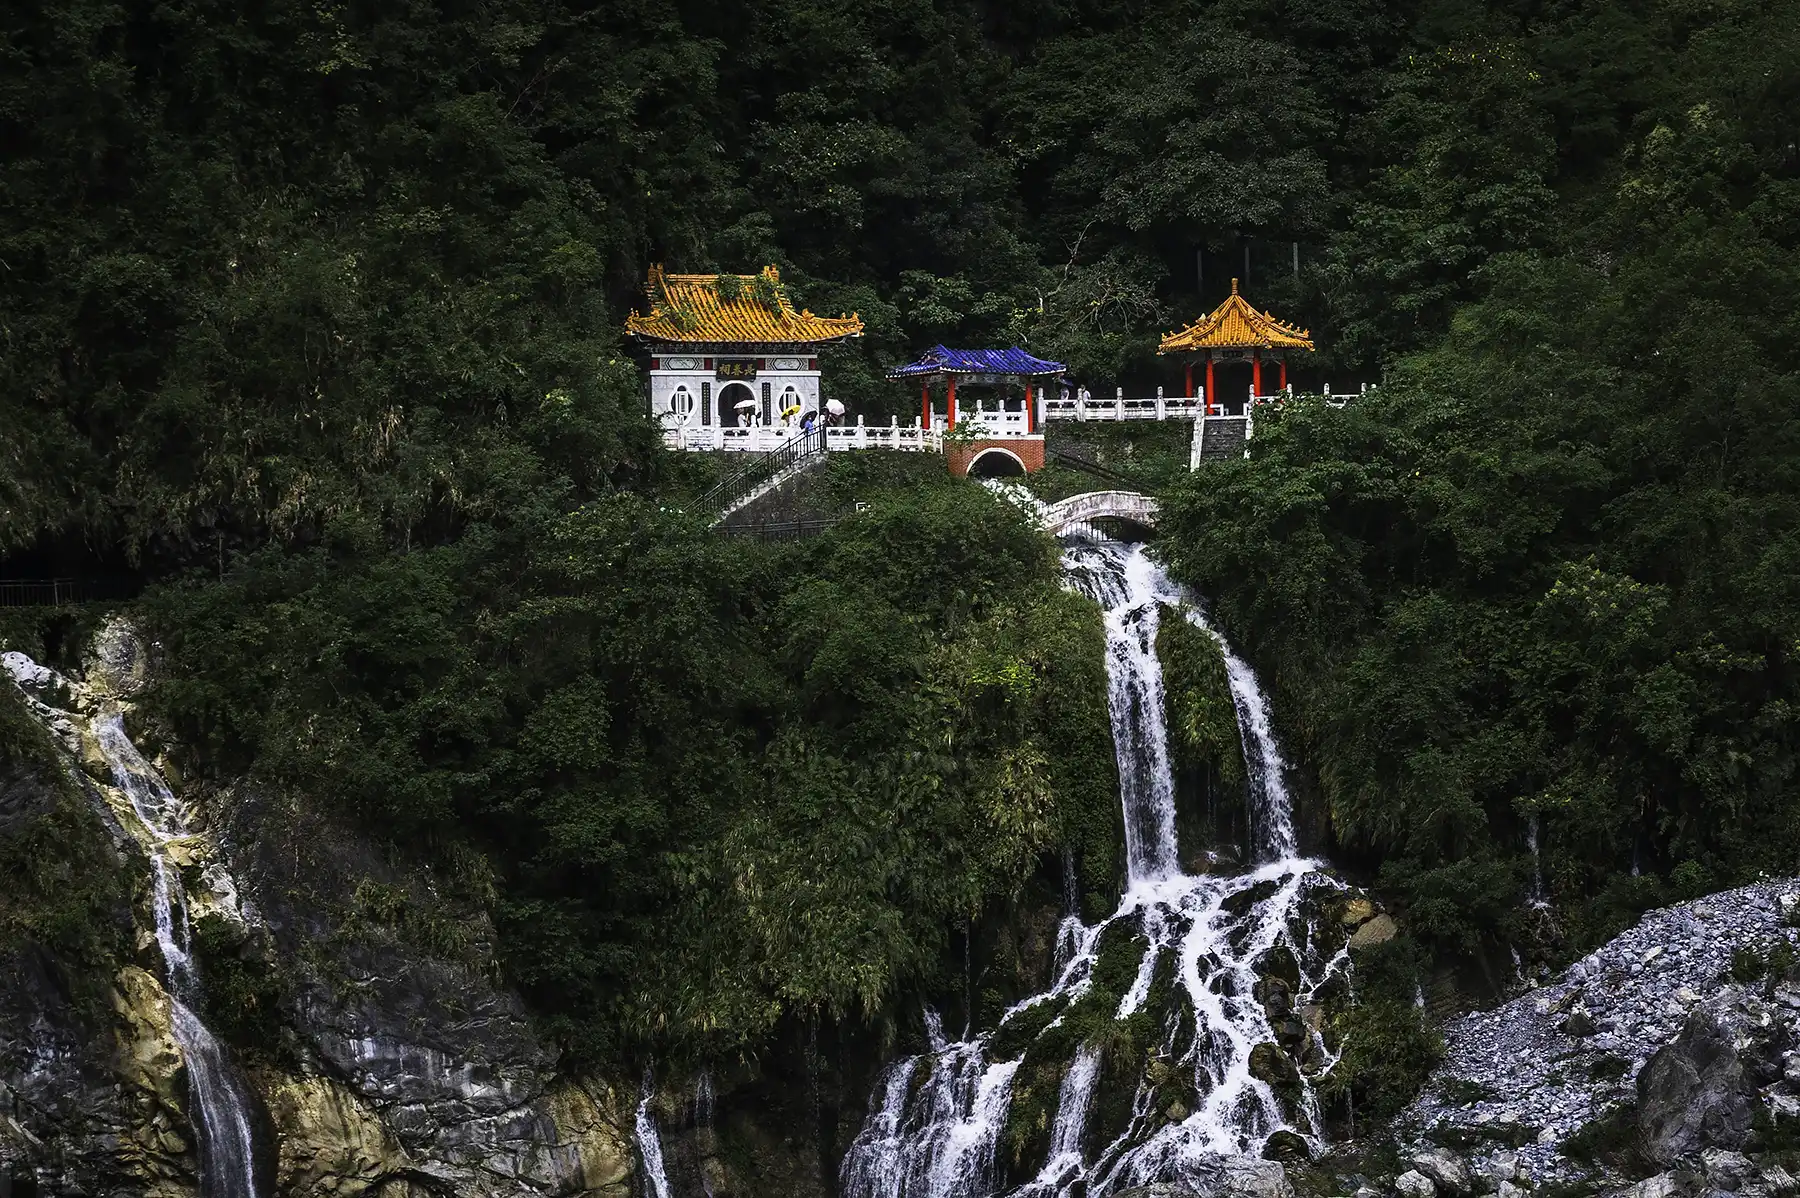 Taroko Gorge: An unforgettable day trip from Hualien